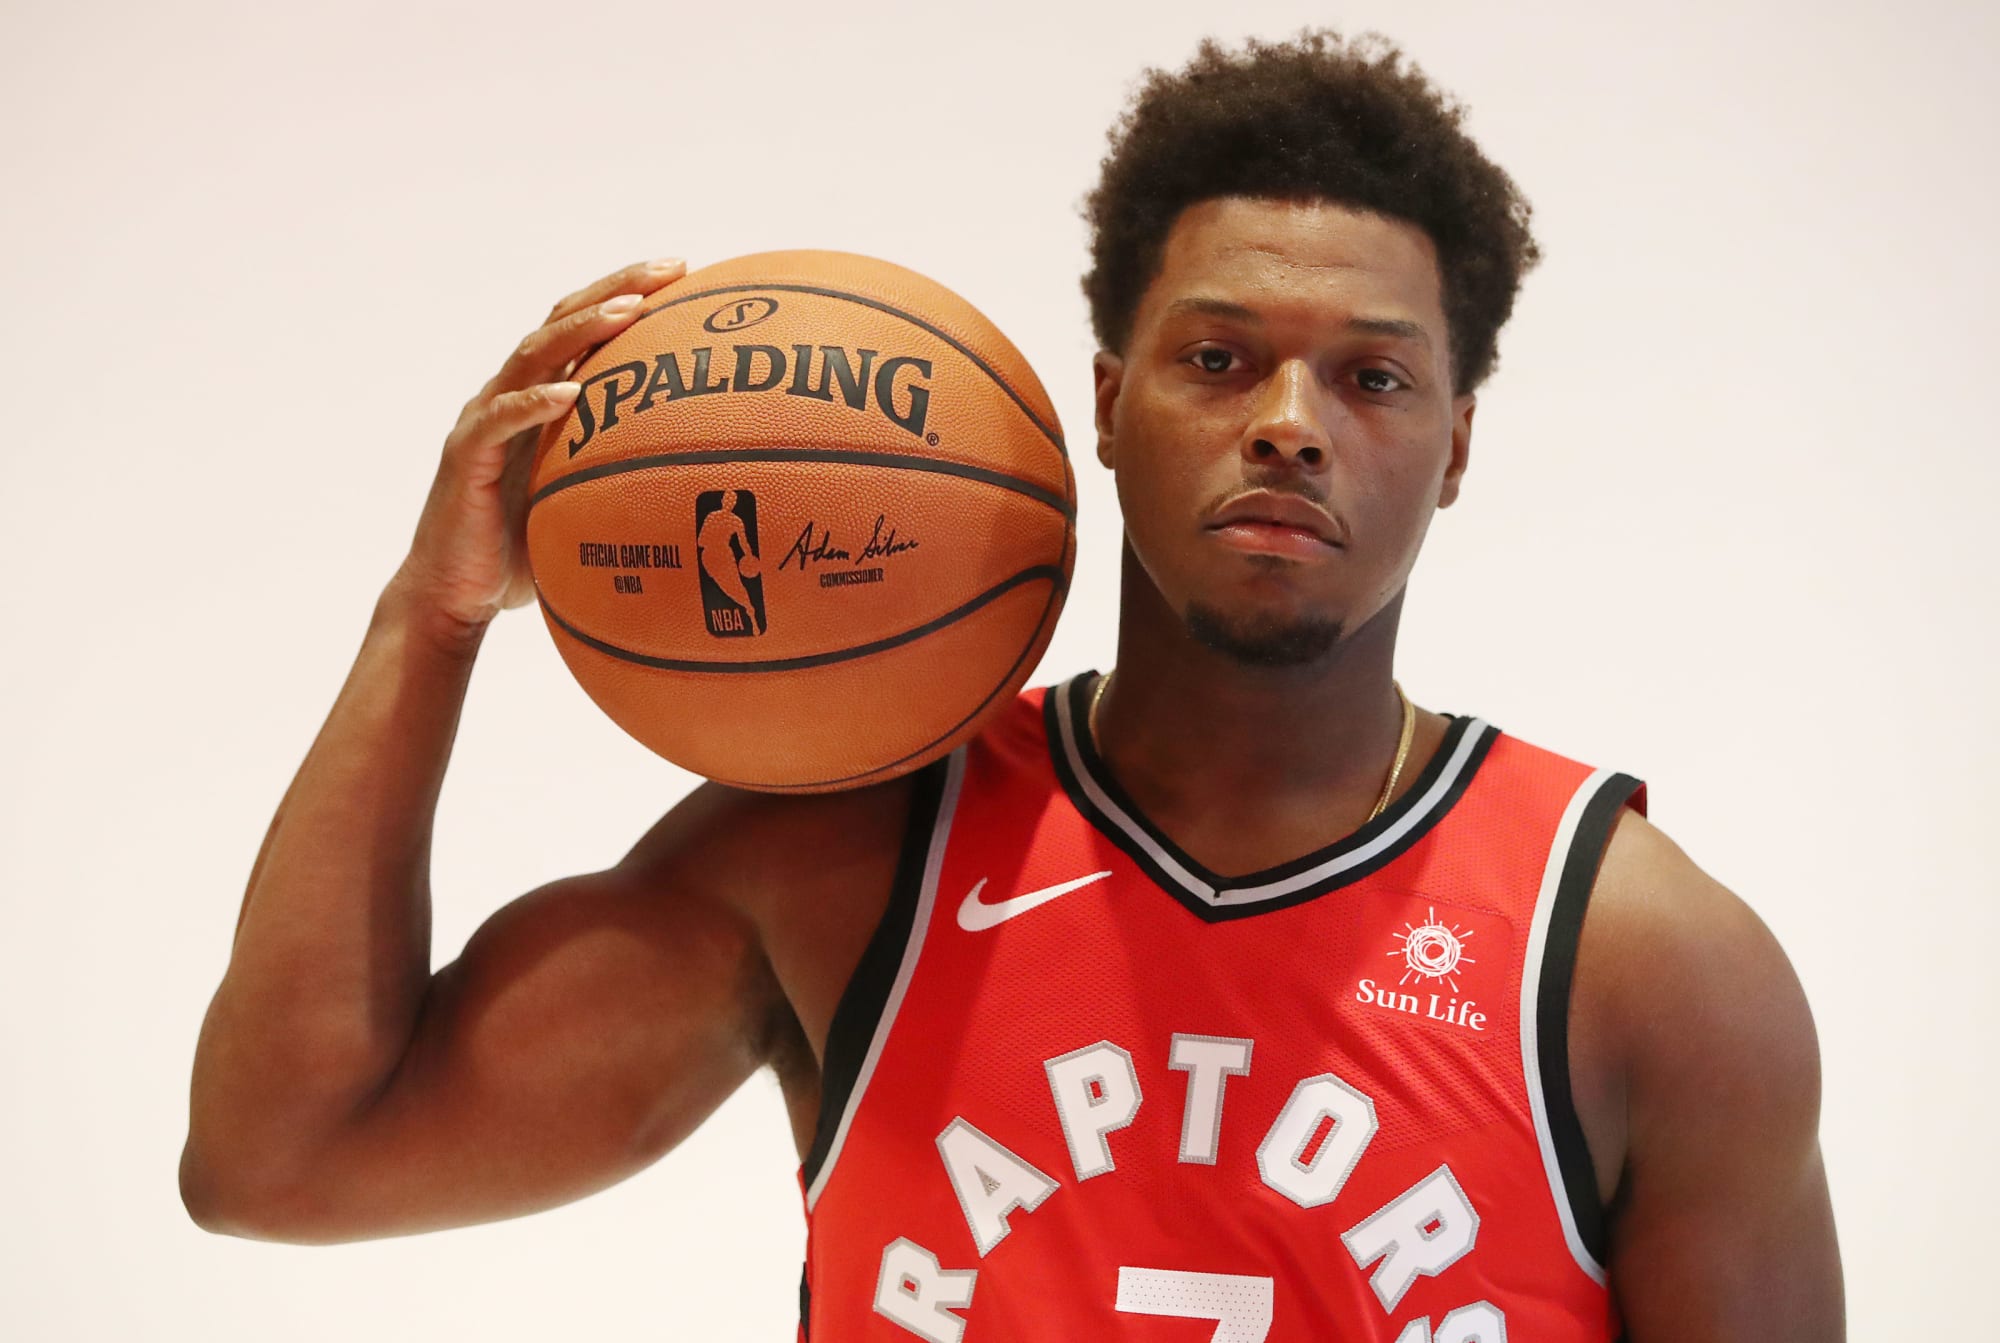 Toronto Raptors most important player is Kyle Lowry